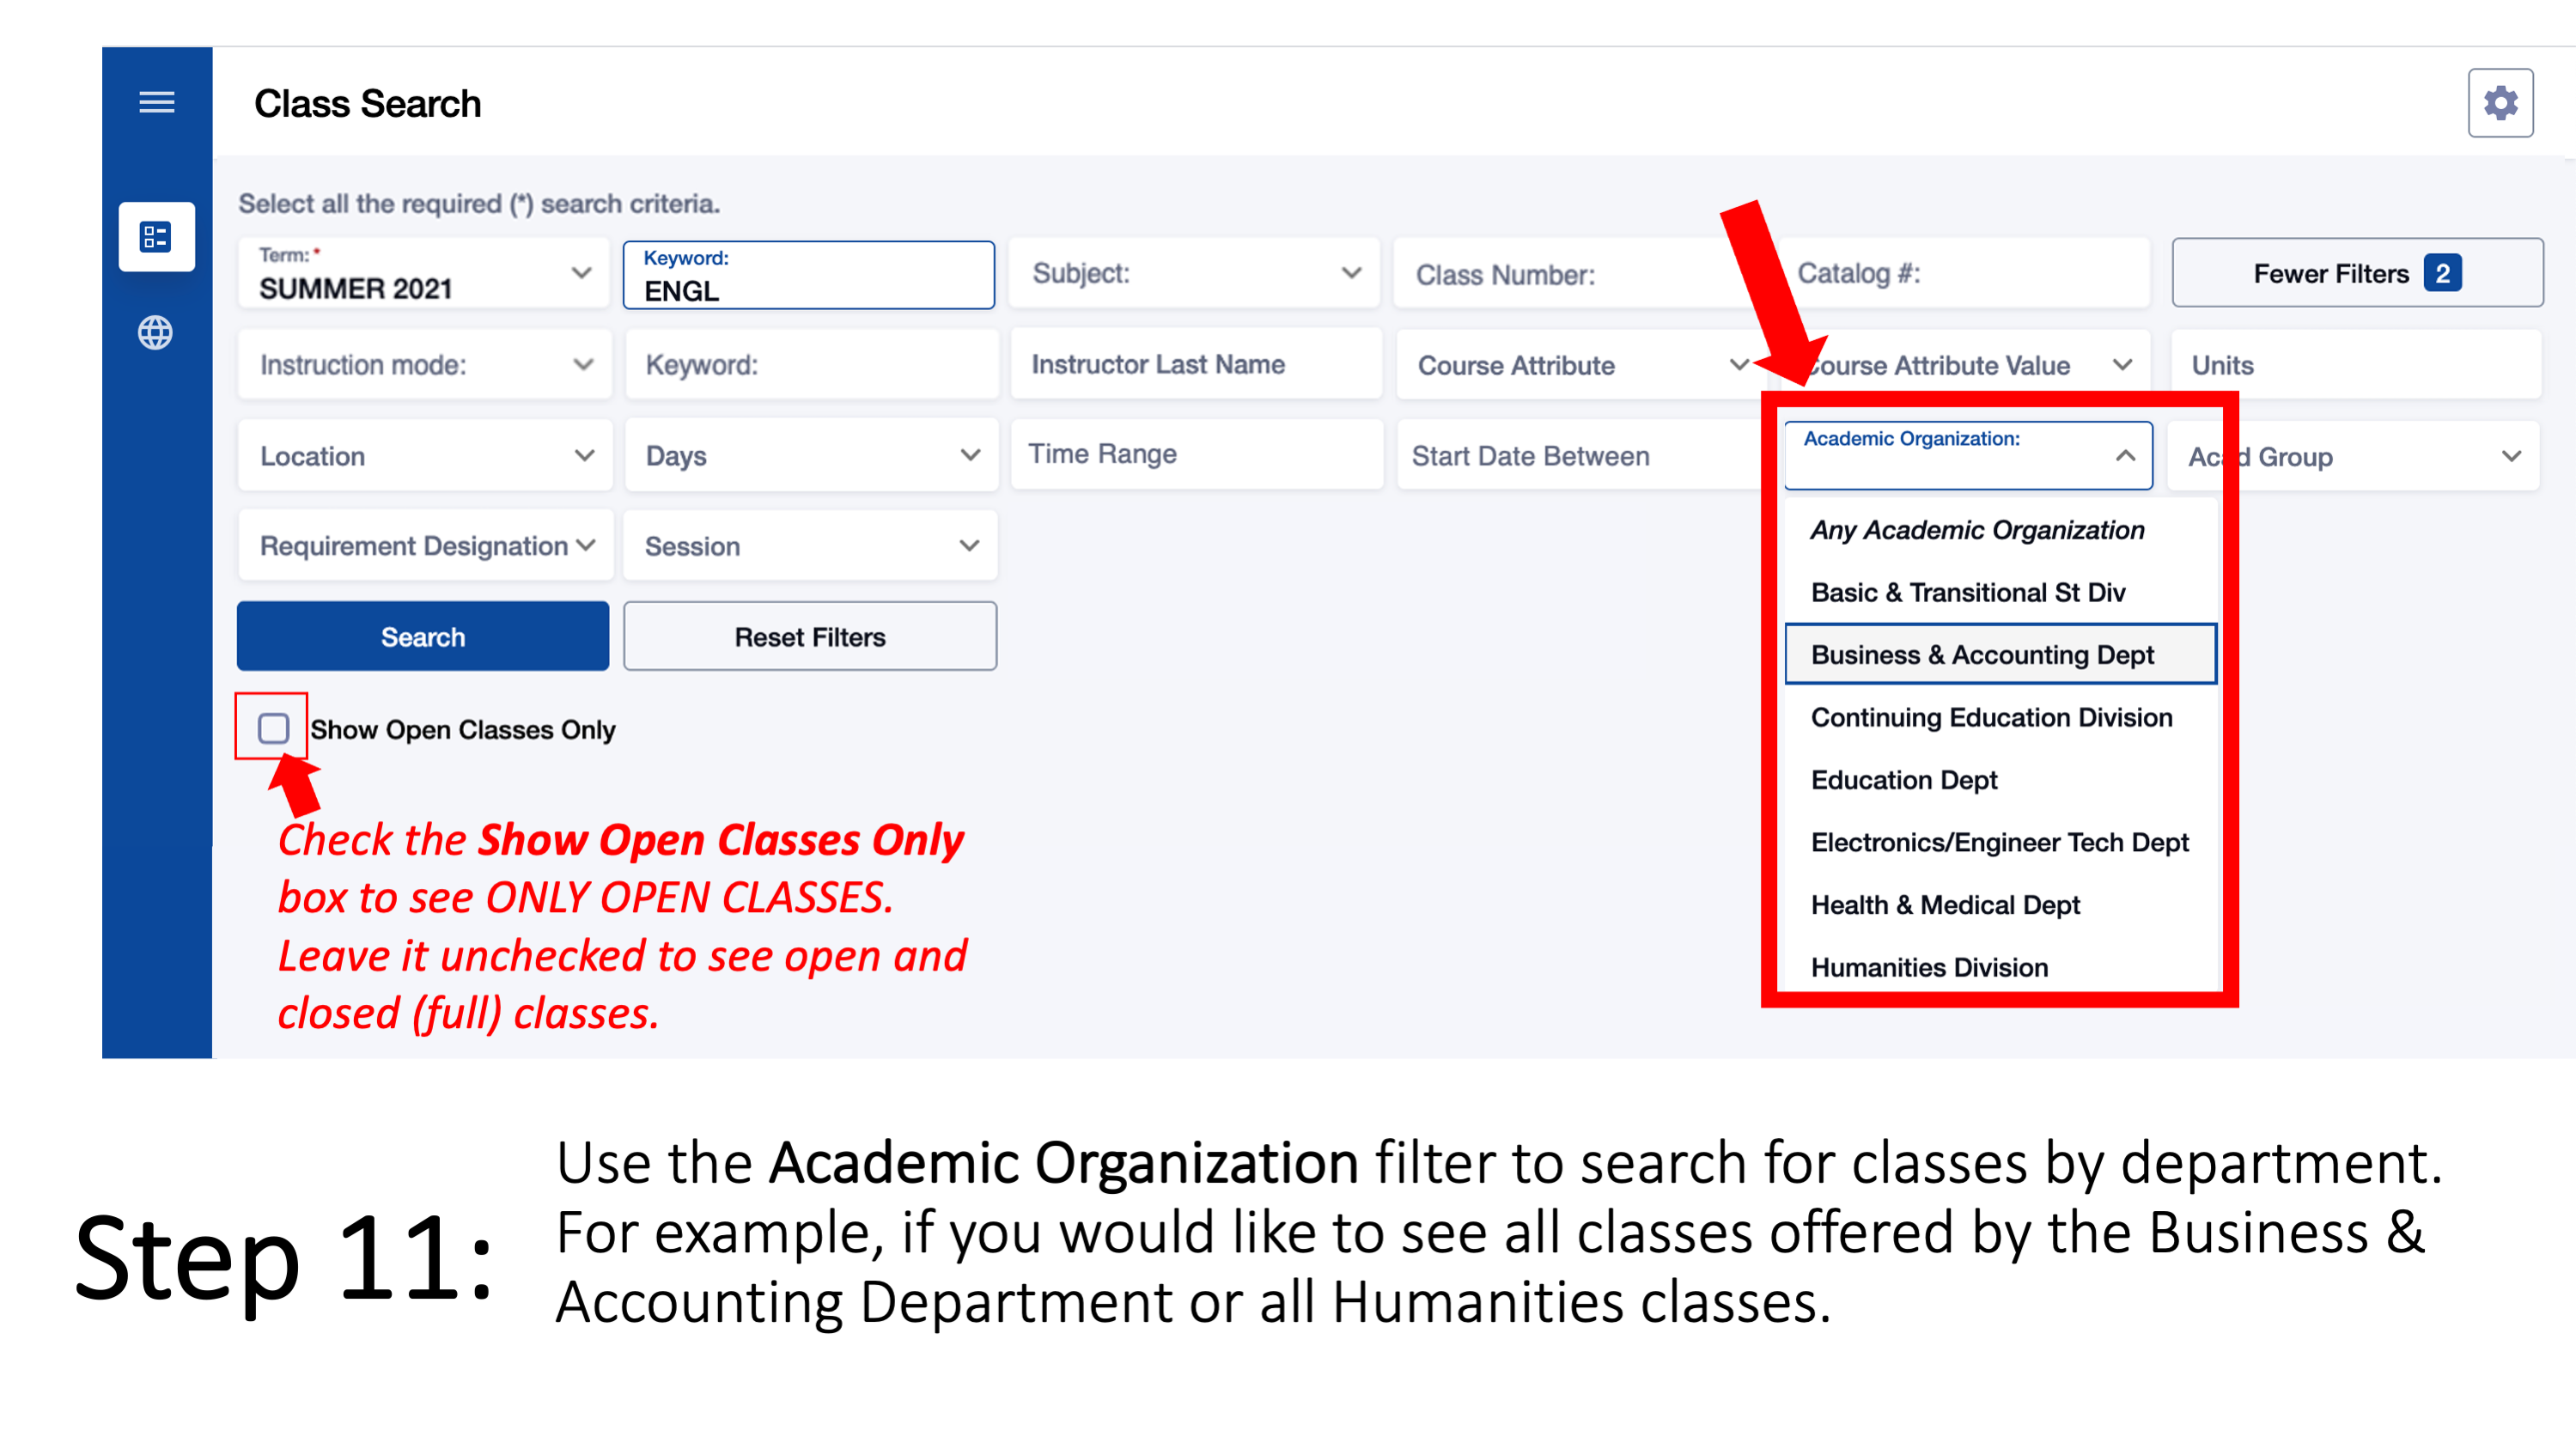 Step 11: Use the Academic Organization filter to search for classes by department. For example, if you would like to see all classes offered by the Business & Accounting Department or all Humanities classes. Check the Show Open Classes Only box to see ONLY OPEN CLASSES. Leave it unchecked to see open and closed (full) classes.